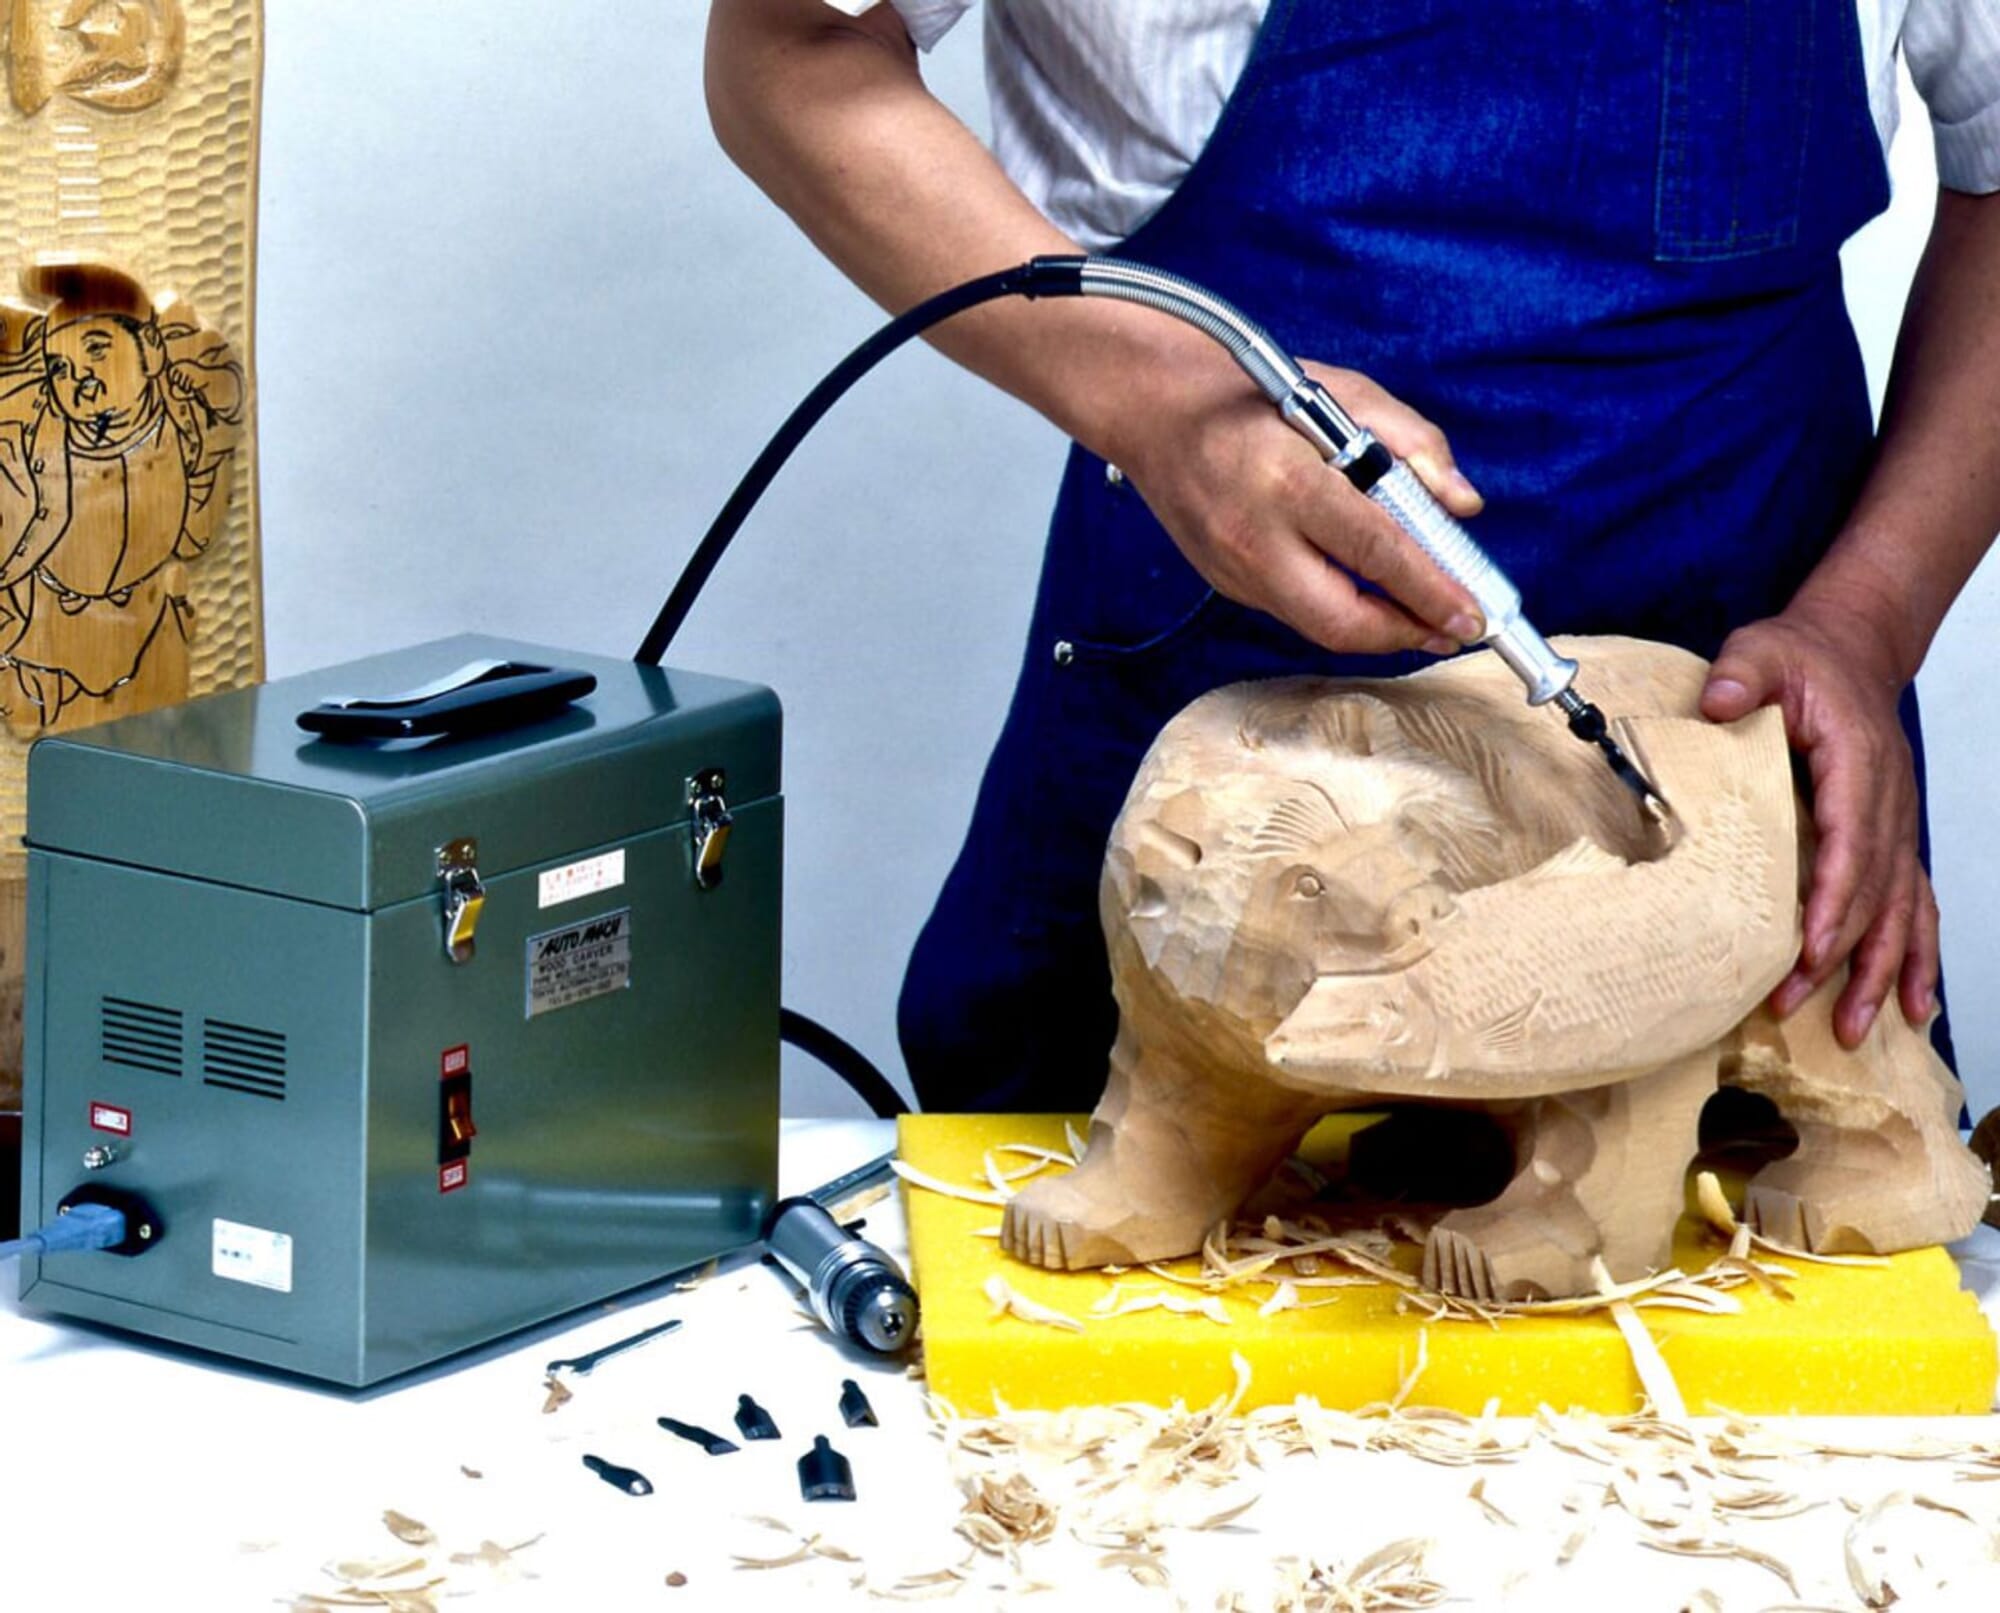 10% off! wood carving machine working